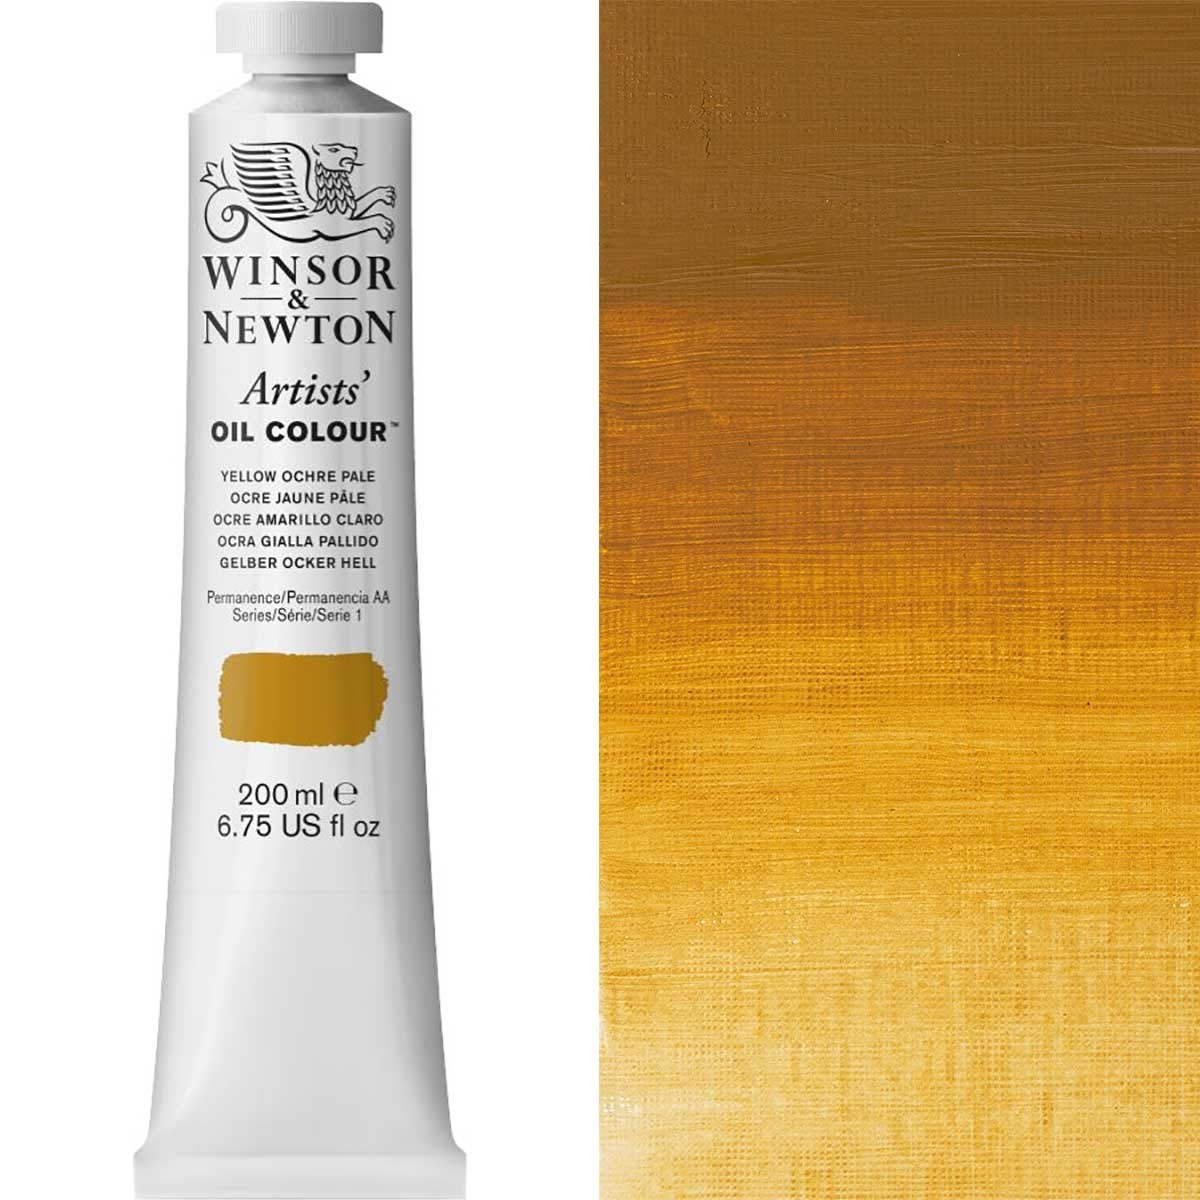 Winsor and Newton - Artists' Oil Colour - 200ml - Yellow Ochre